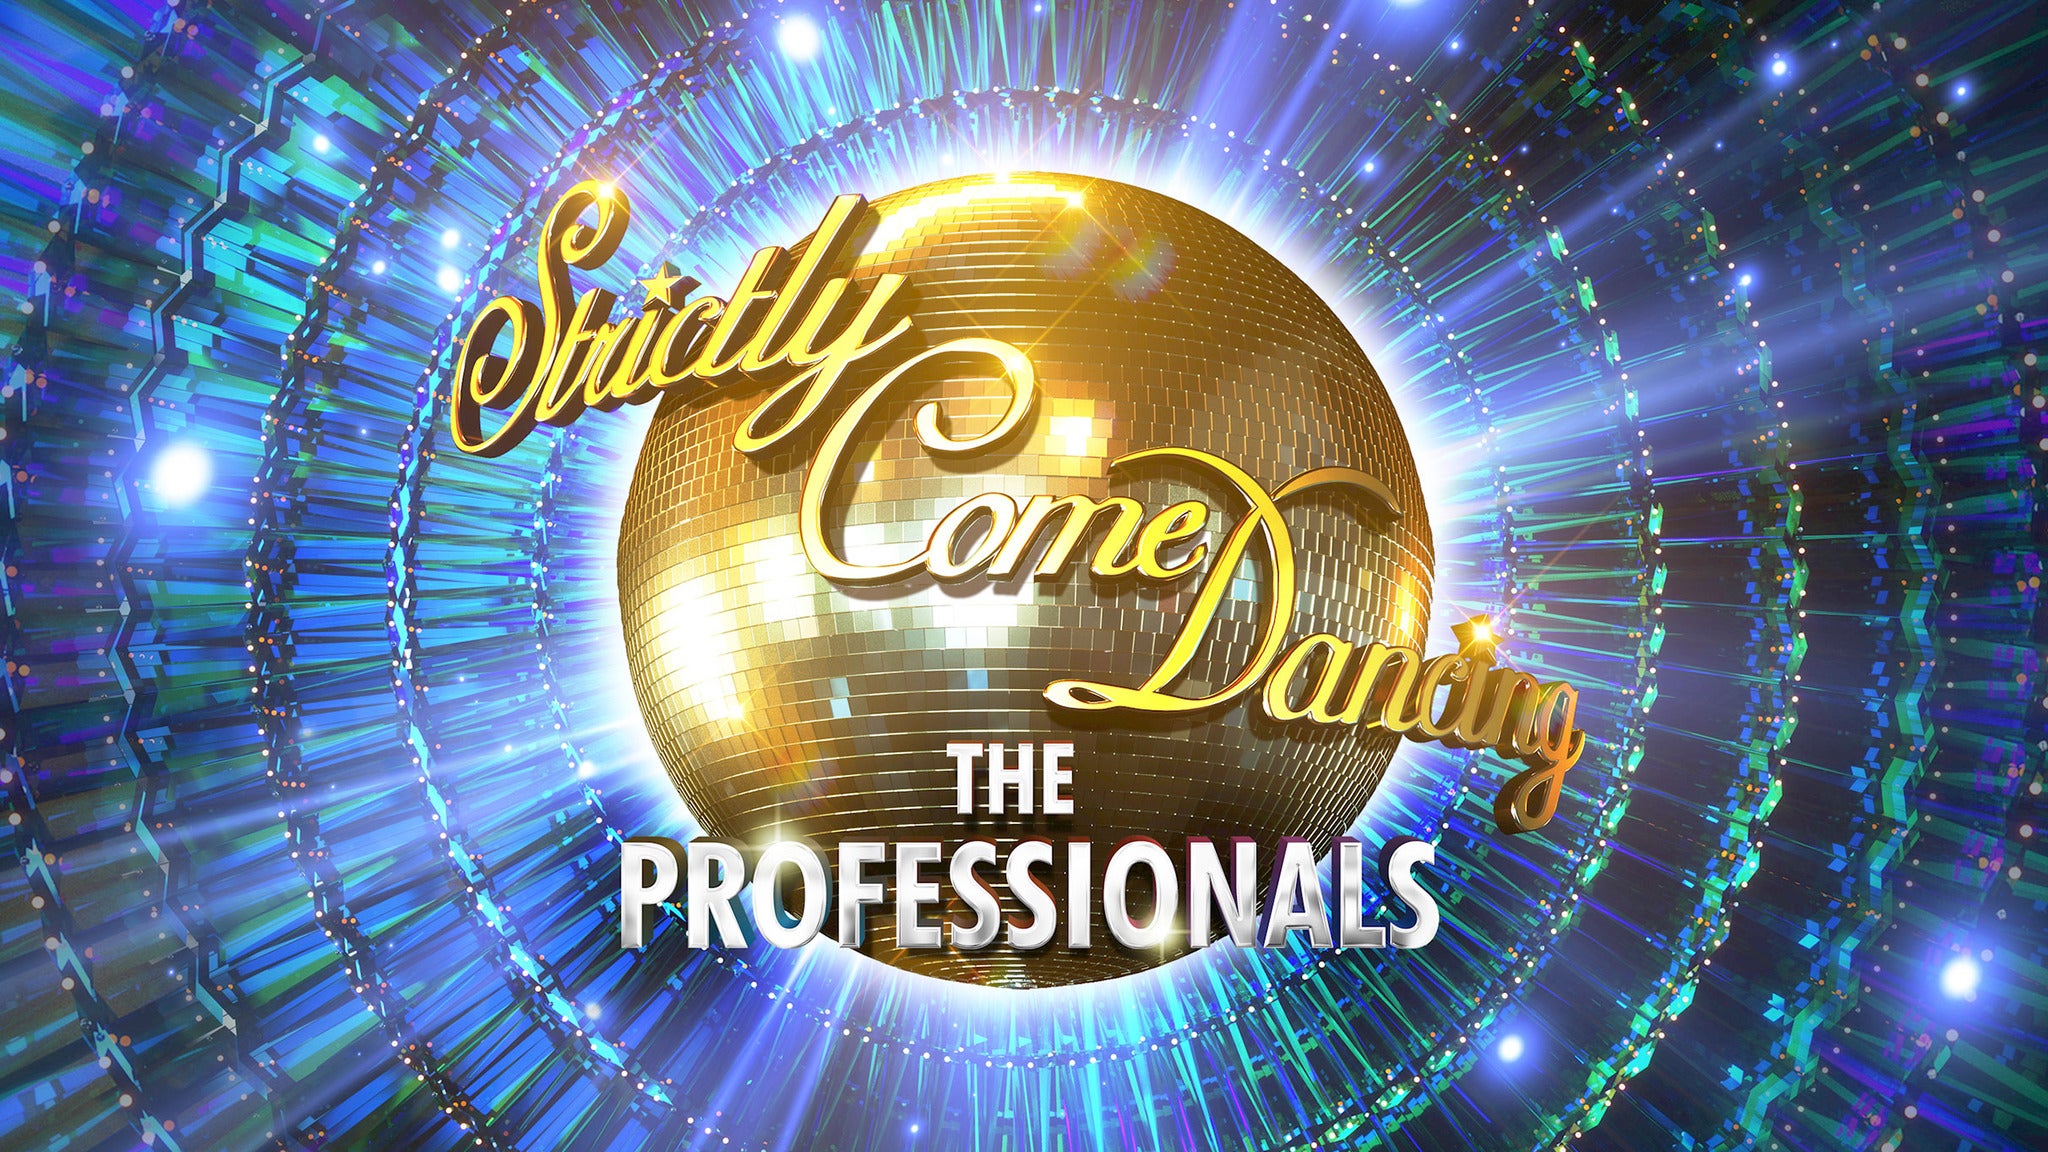 Strictly Come Dancing - the Professionals in Hull promo photo for Three presale offer code